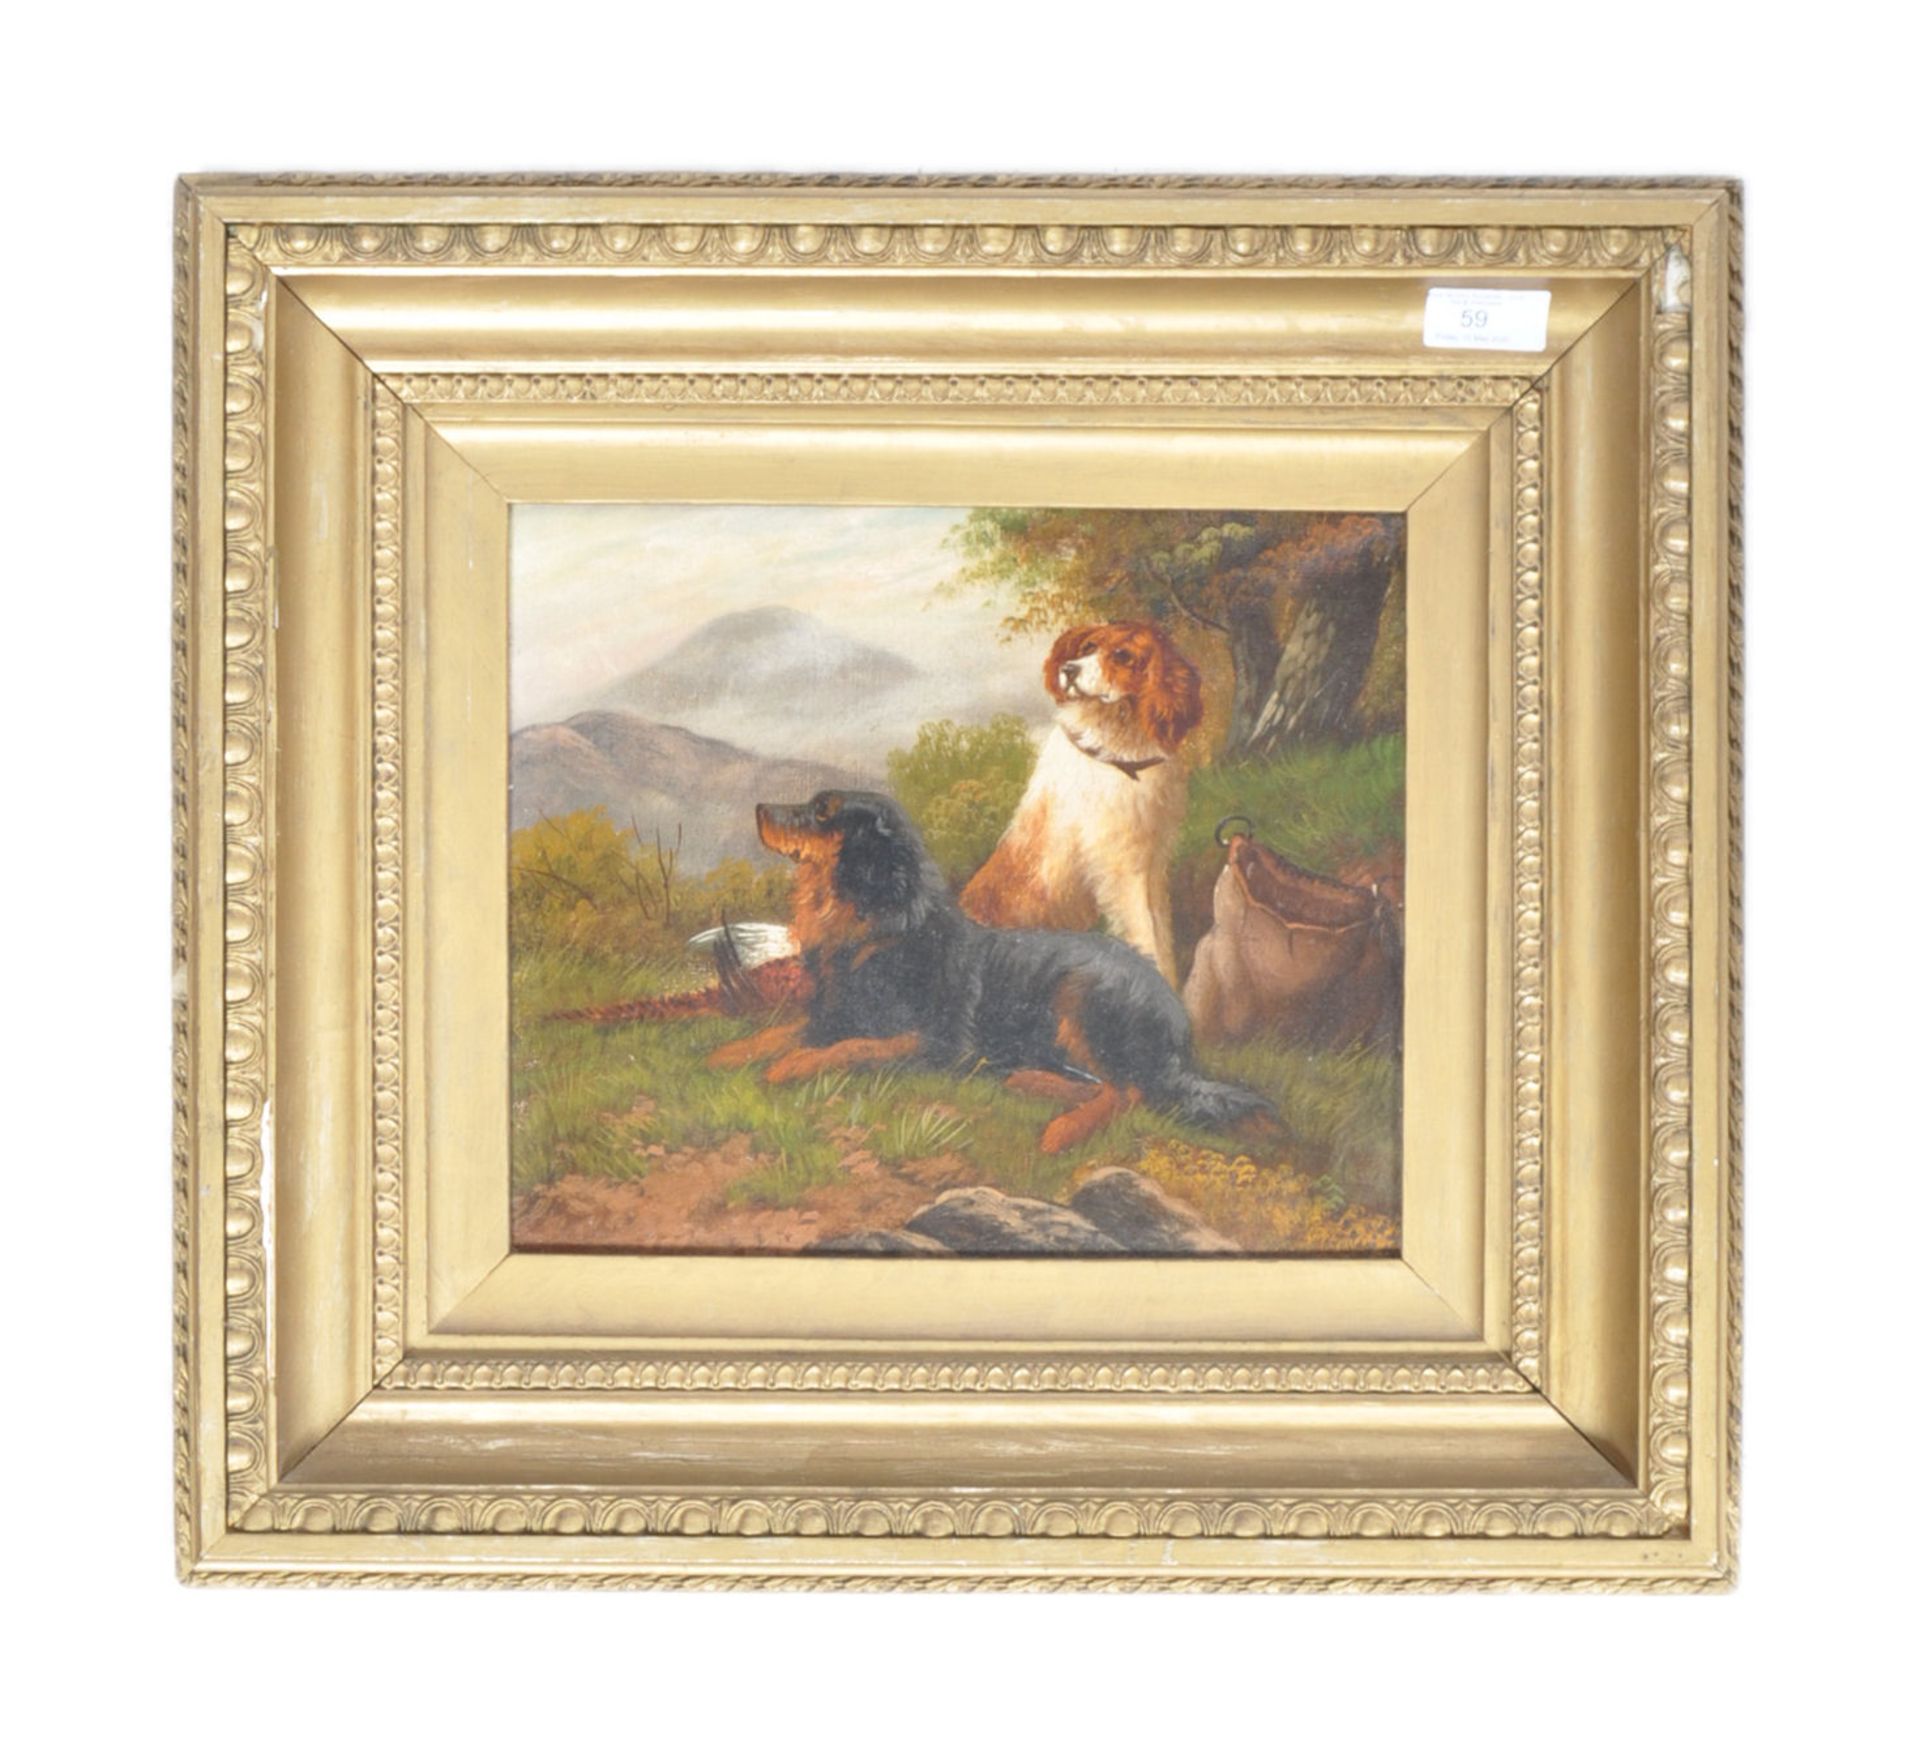 CHARMING 19TH CENTURY PAINTING OF DOGS